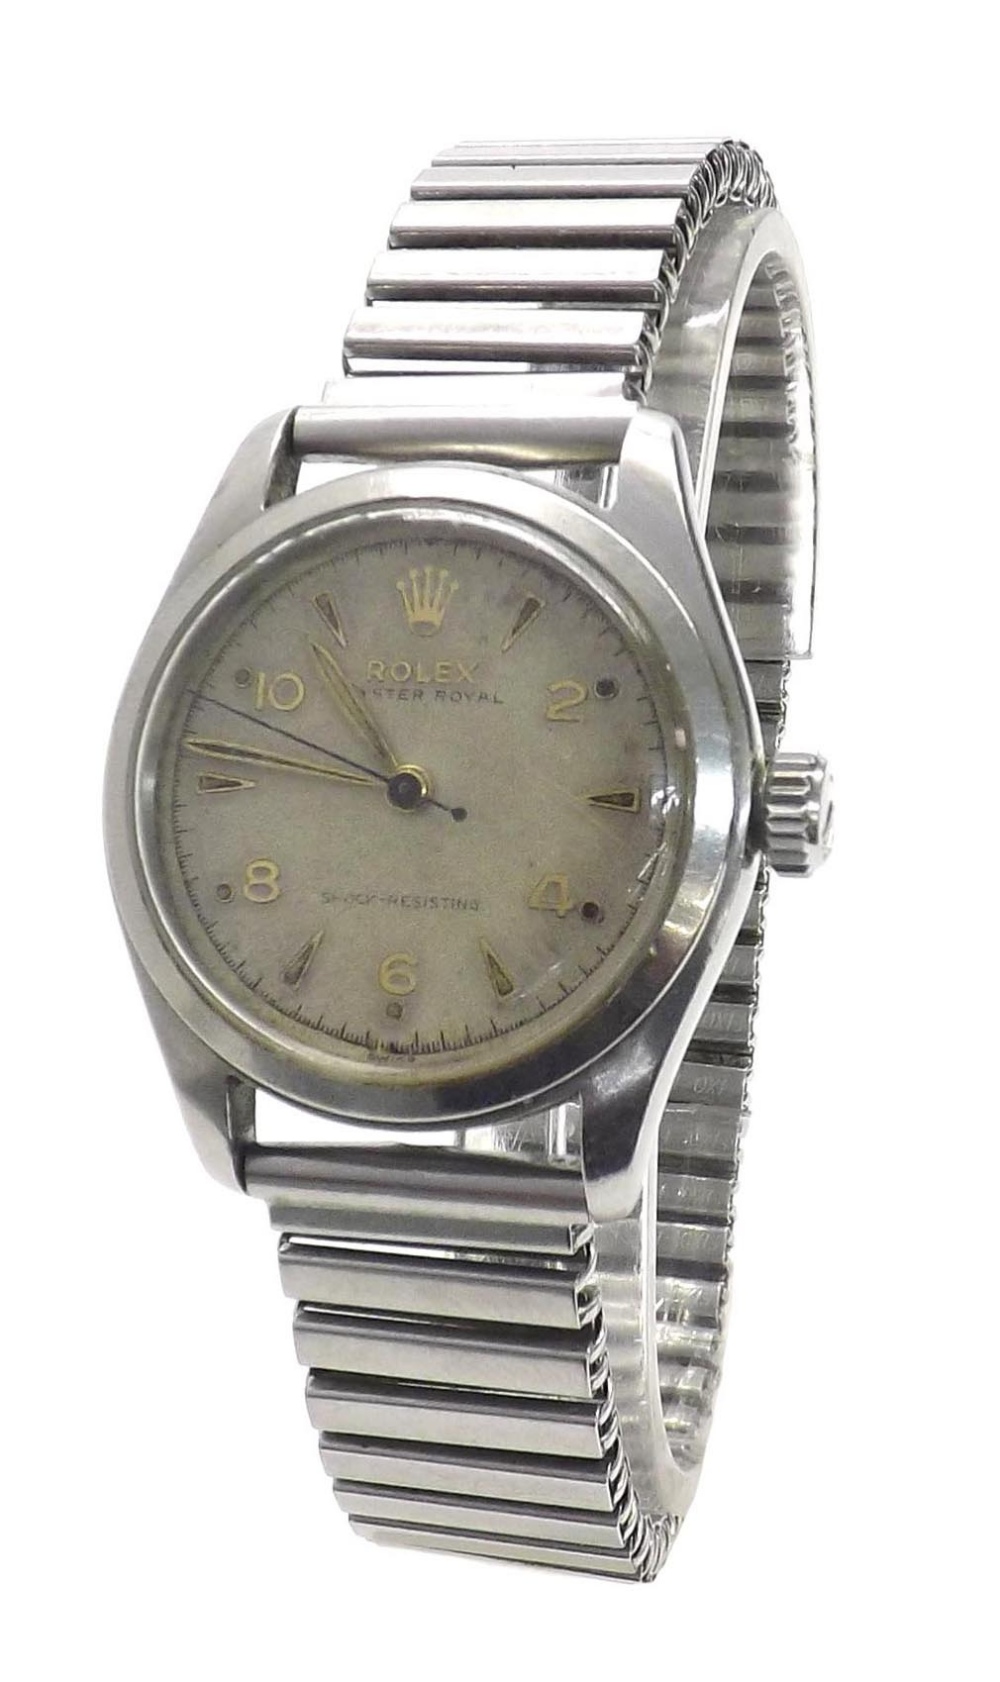 Rolex Oyster Royal stainless steel gentleman's wristwatch, ref. 832030, the circular dial with